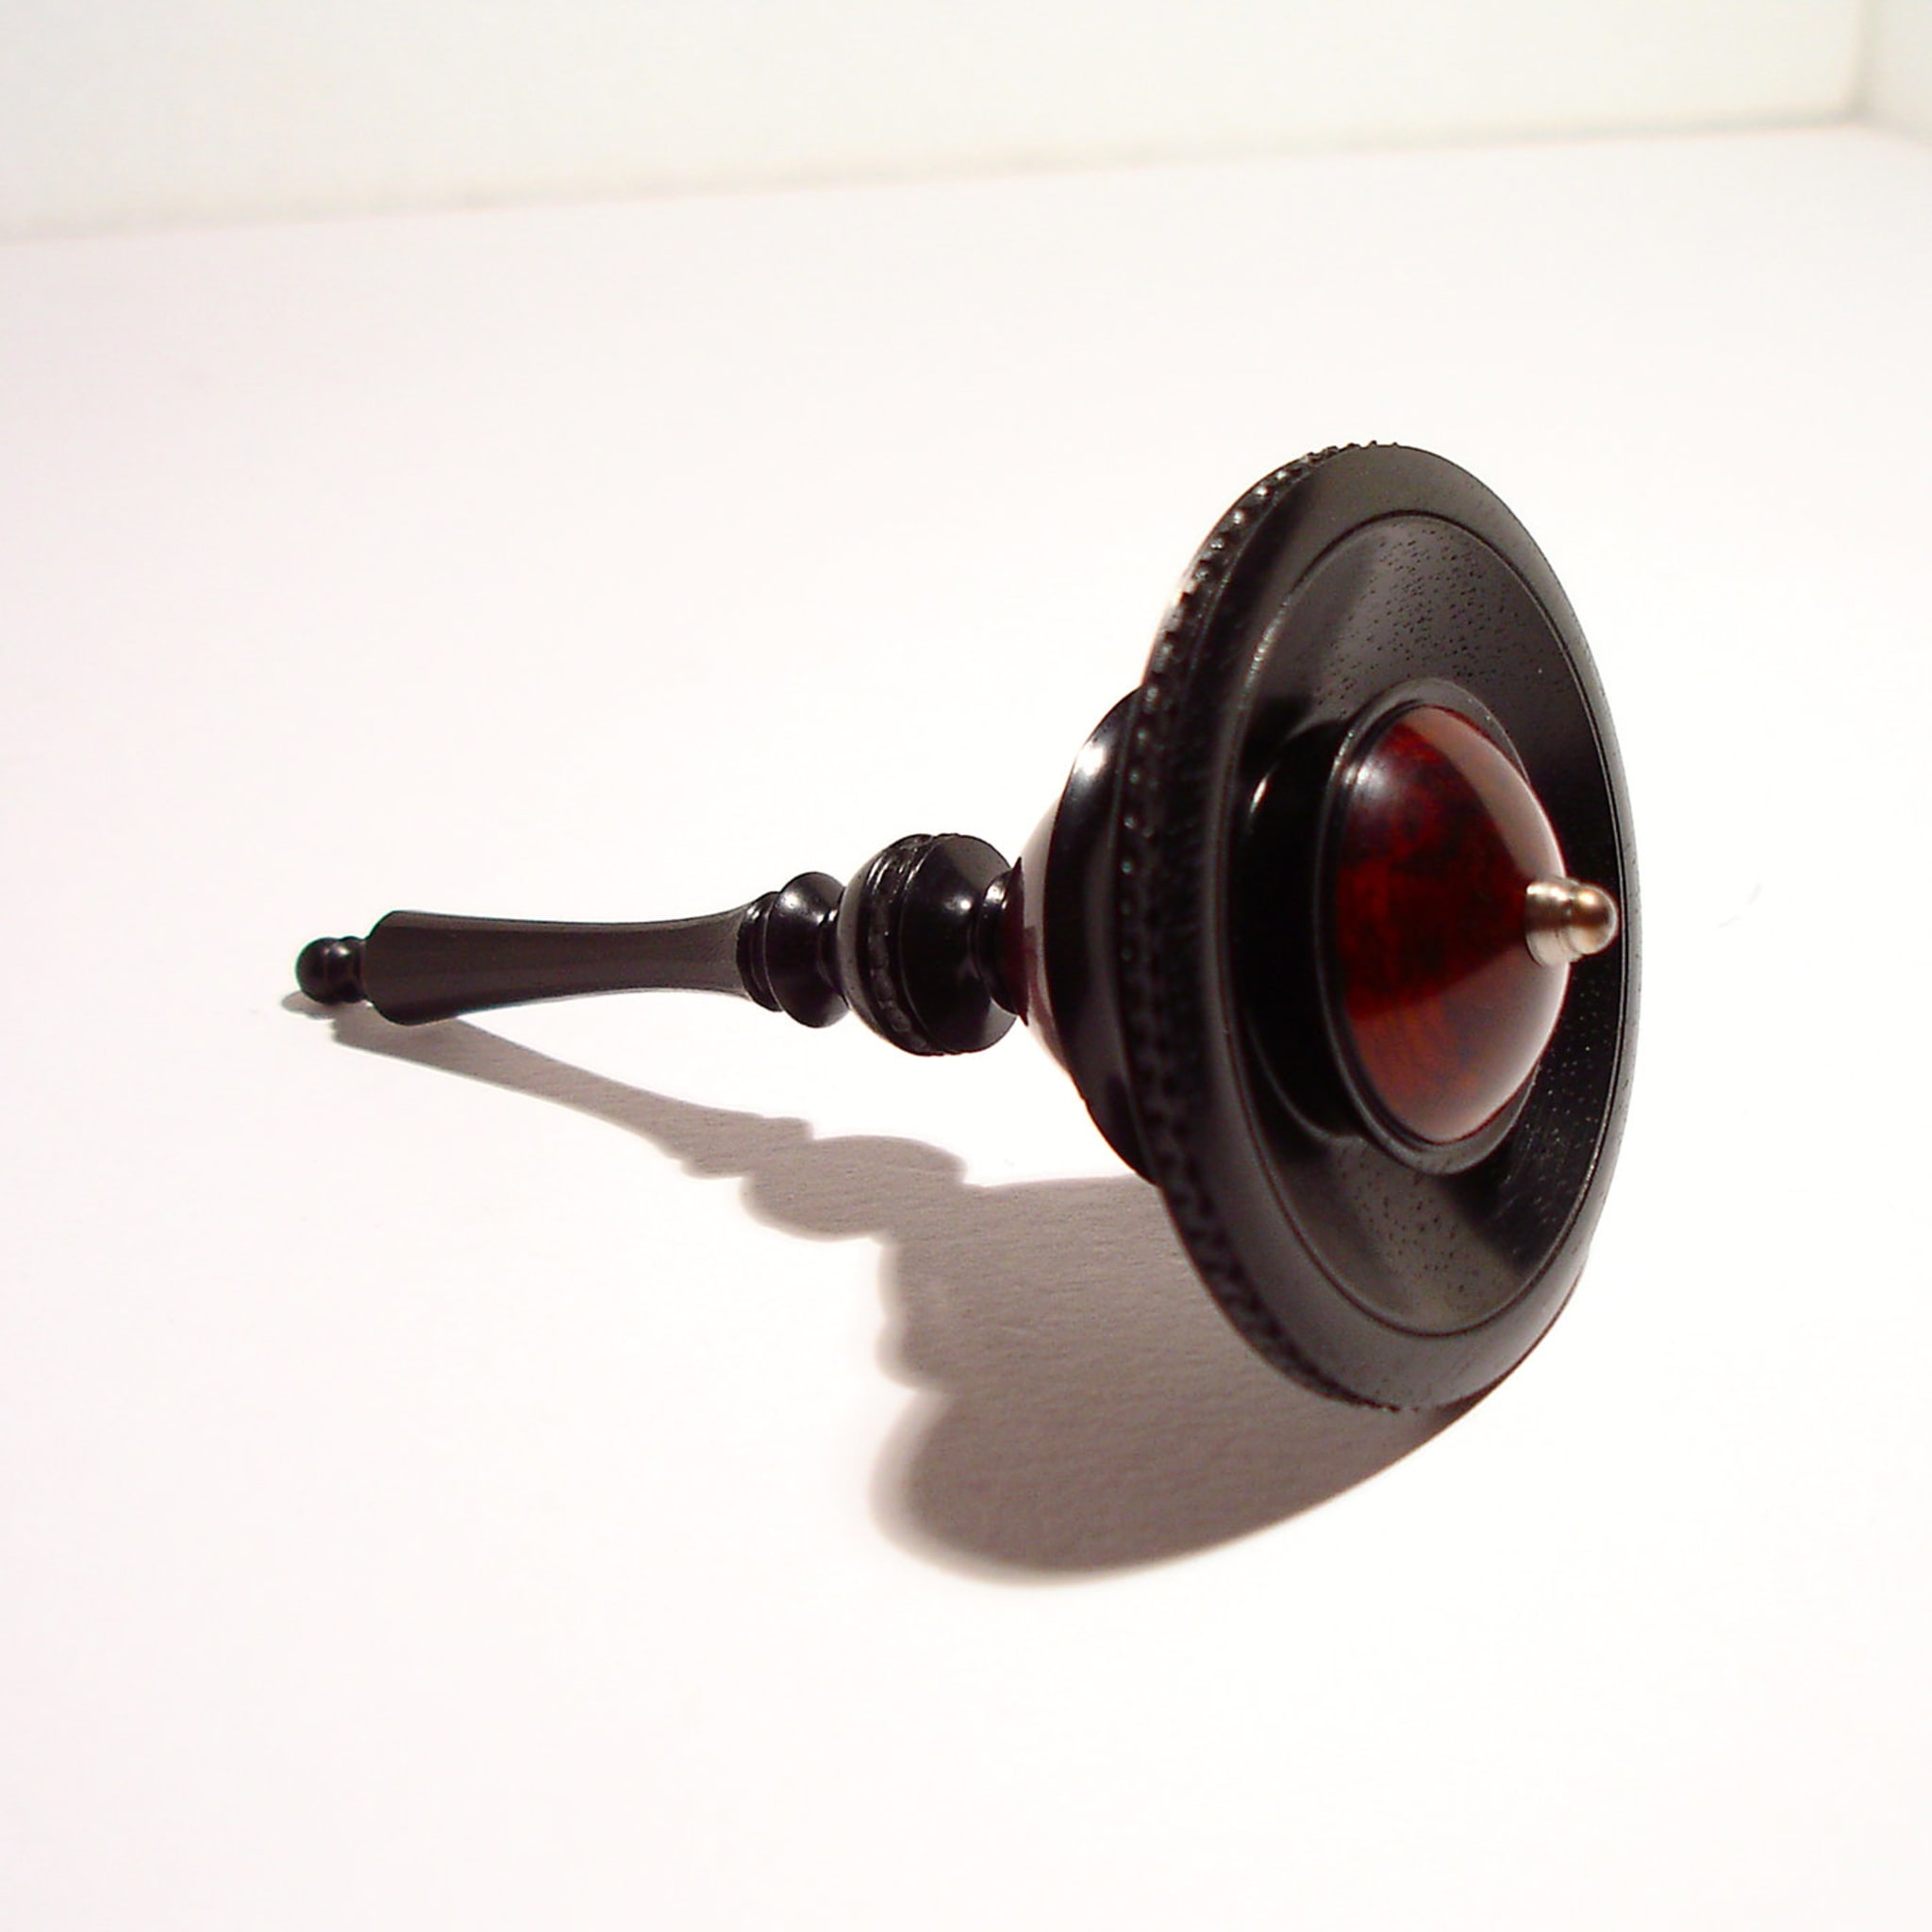 DarkStyle Spinning Top in Ebony and Snakewood - Alternative view 3